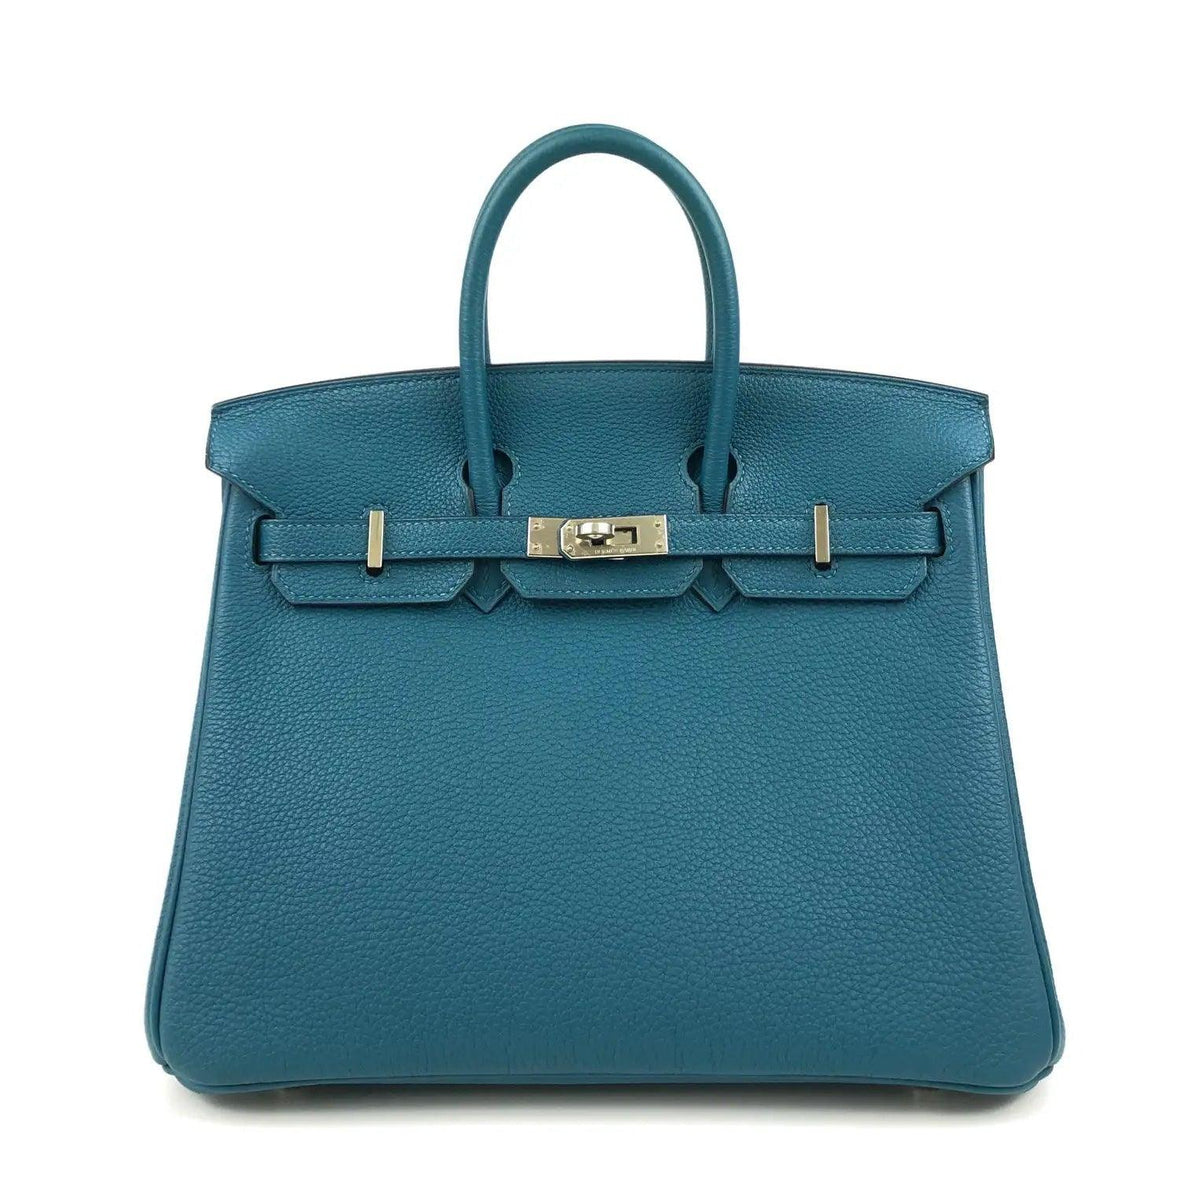 Pre- owned Rare HERMES Birkin 25 Colvert Blue Togo Leather Bag - theREMODA